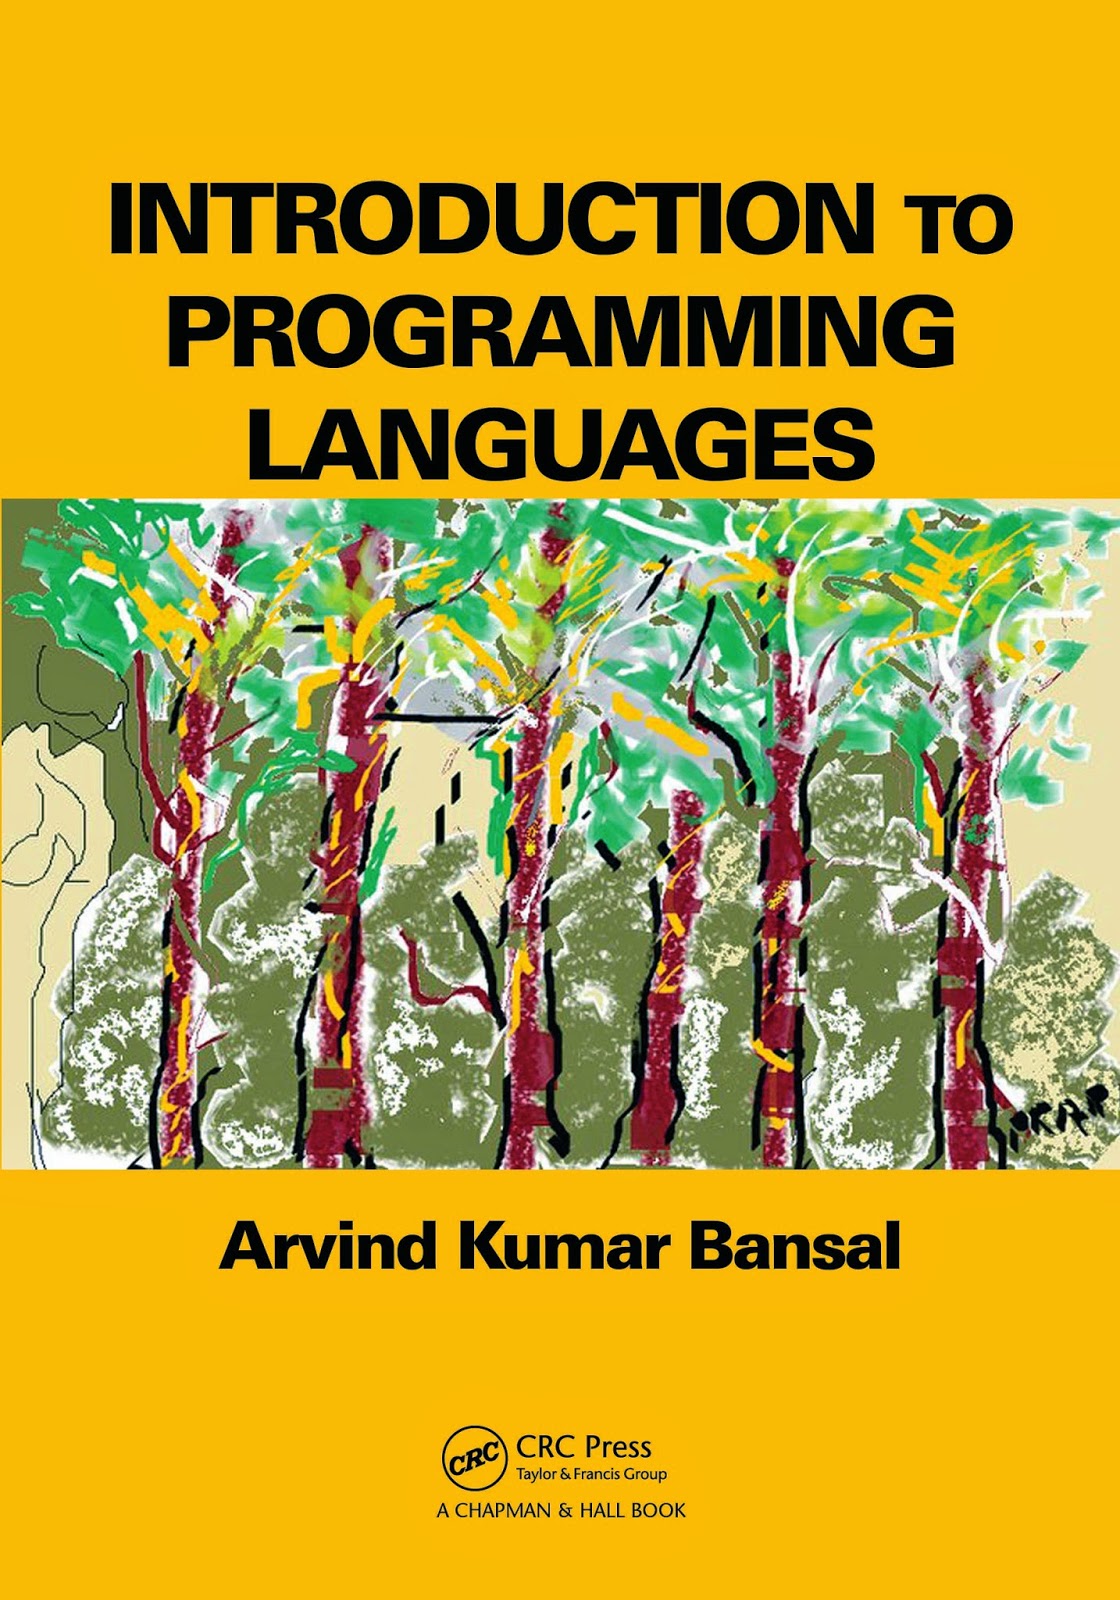 http://kingcheapebook.blogspot.com/2014/07/introduction-to-programming-languages.html